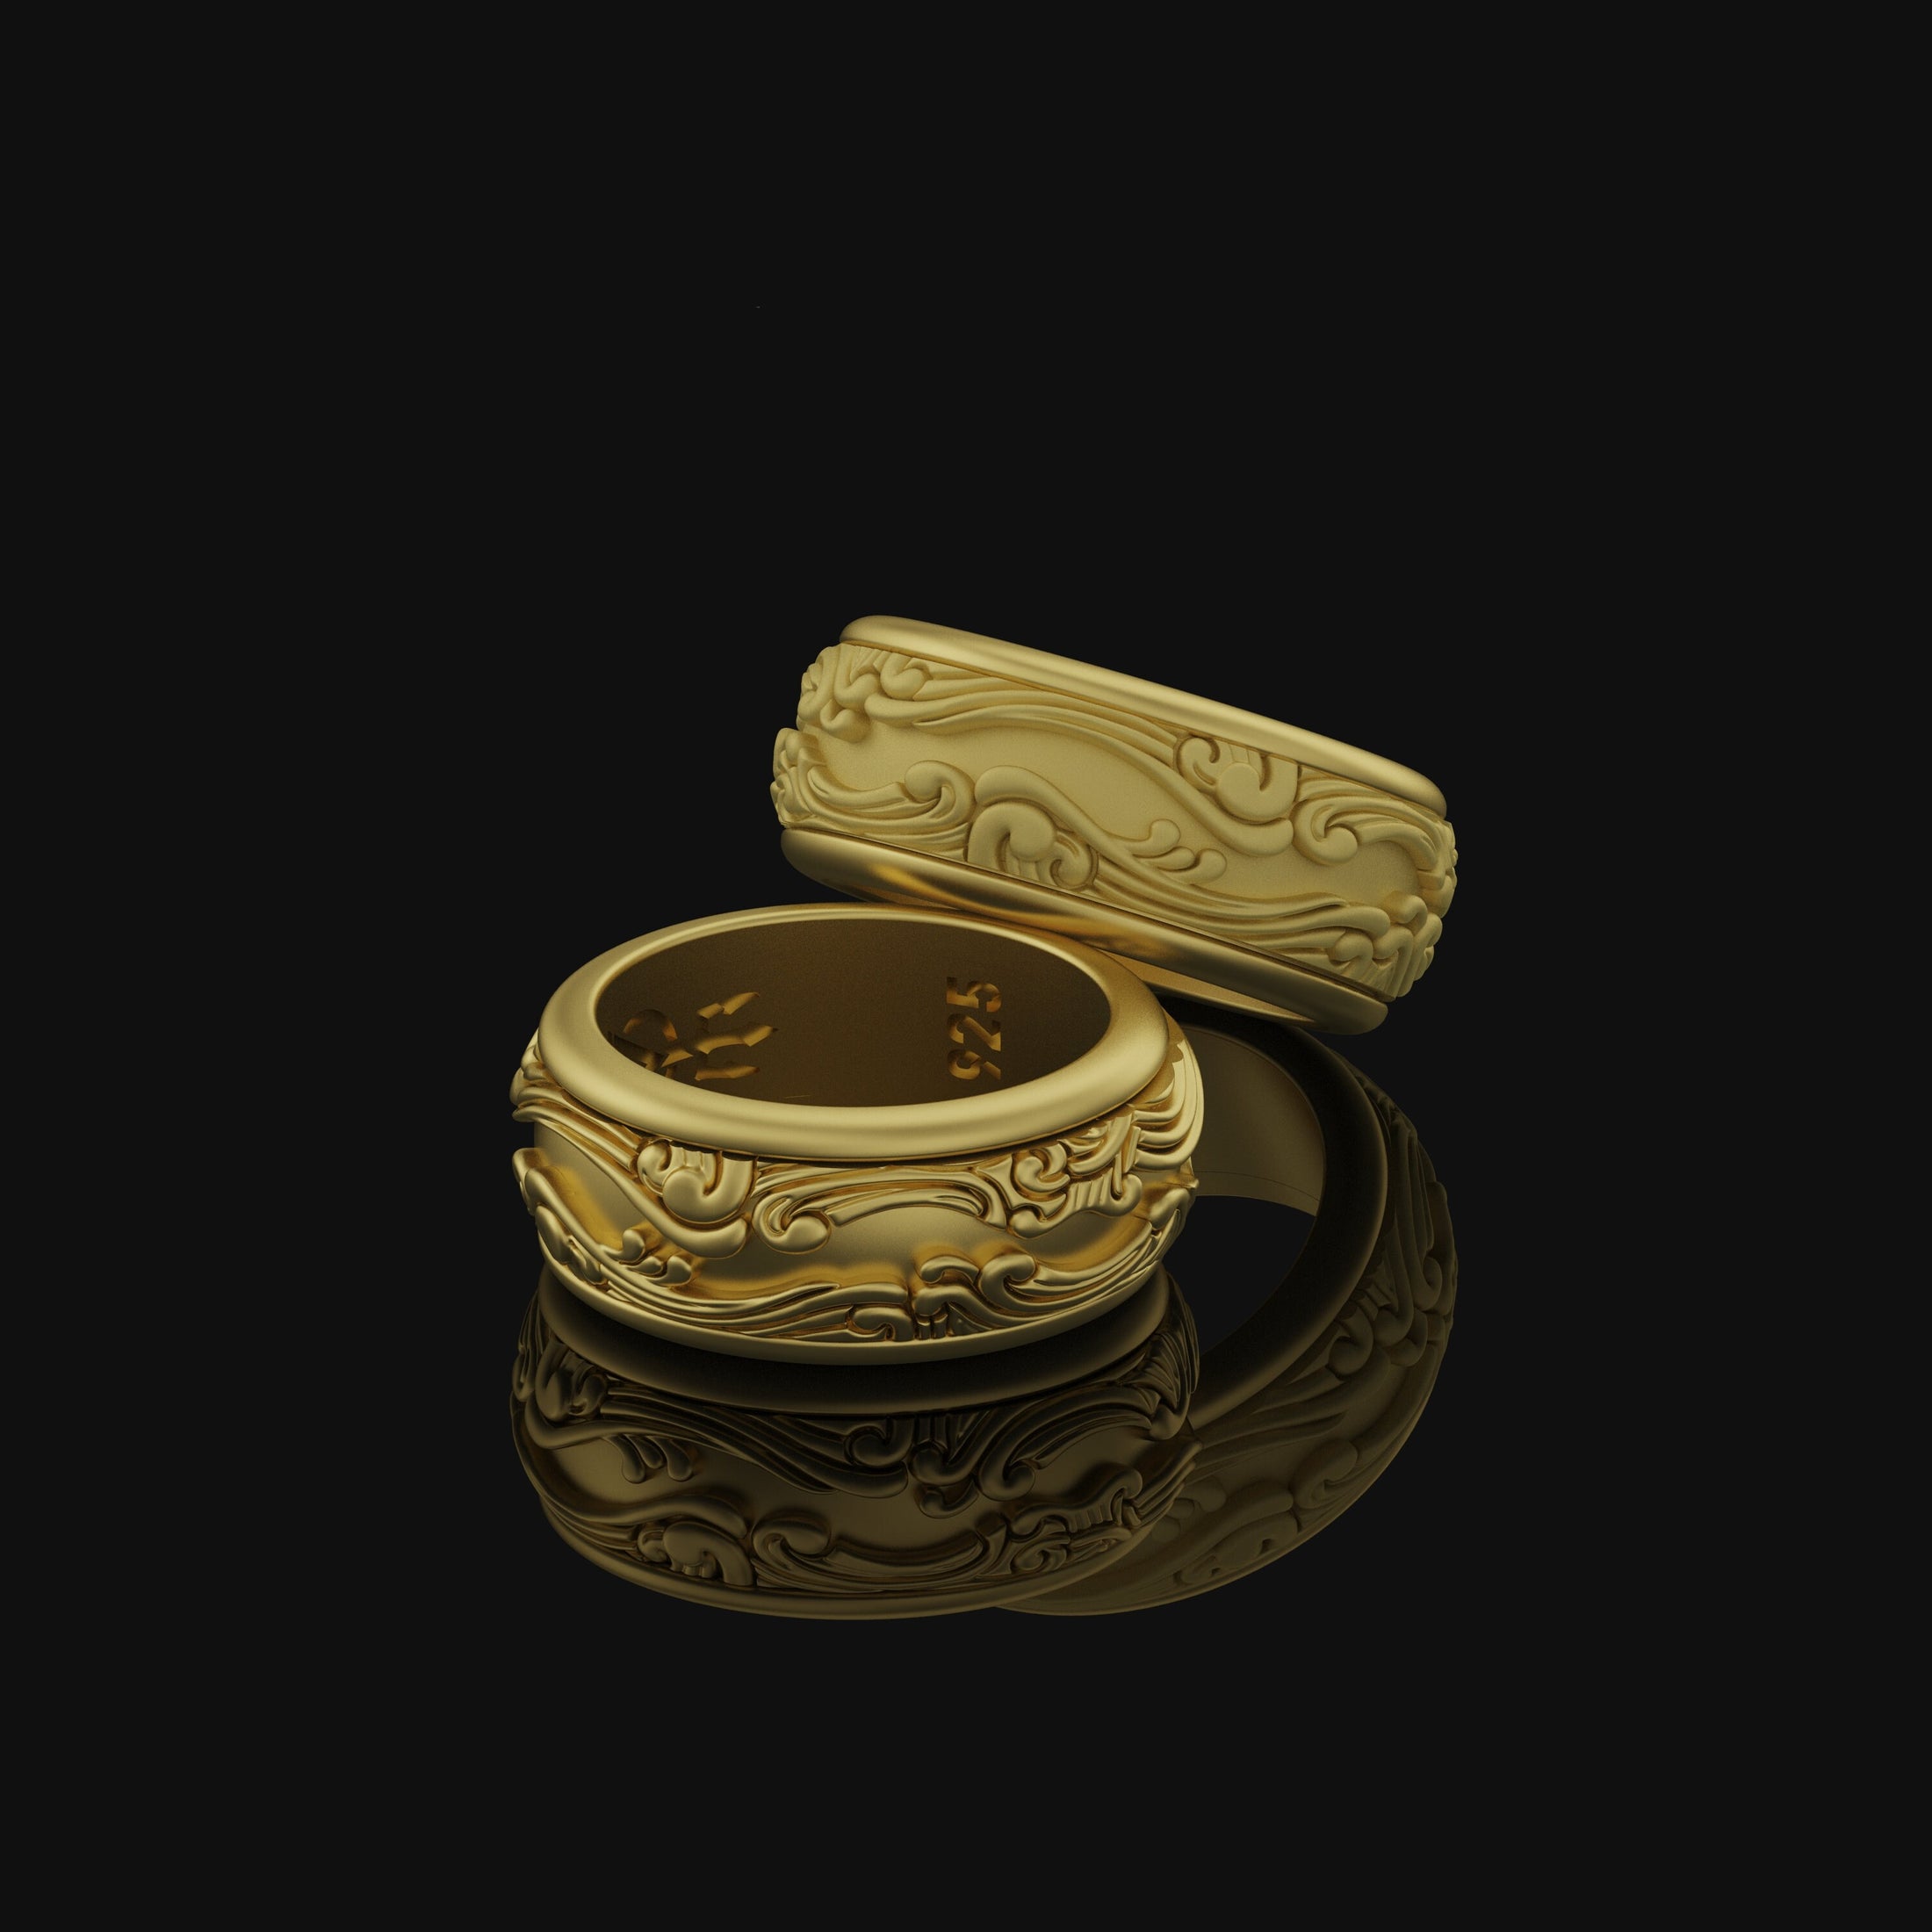 Rotating Carbon Wave Band - Engravable Gold Finish